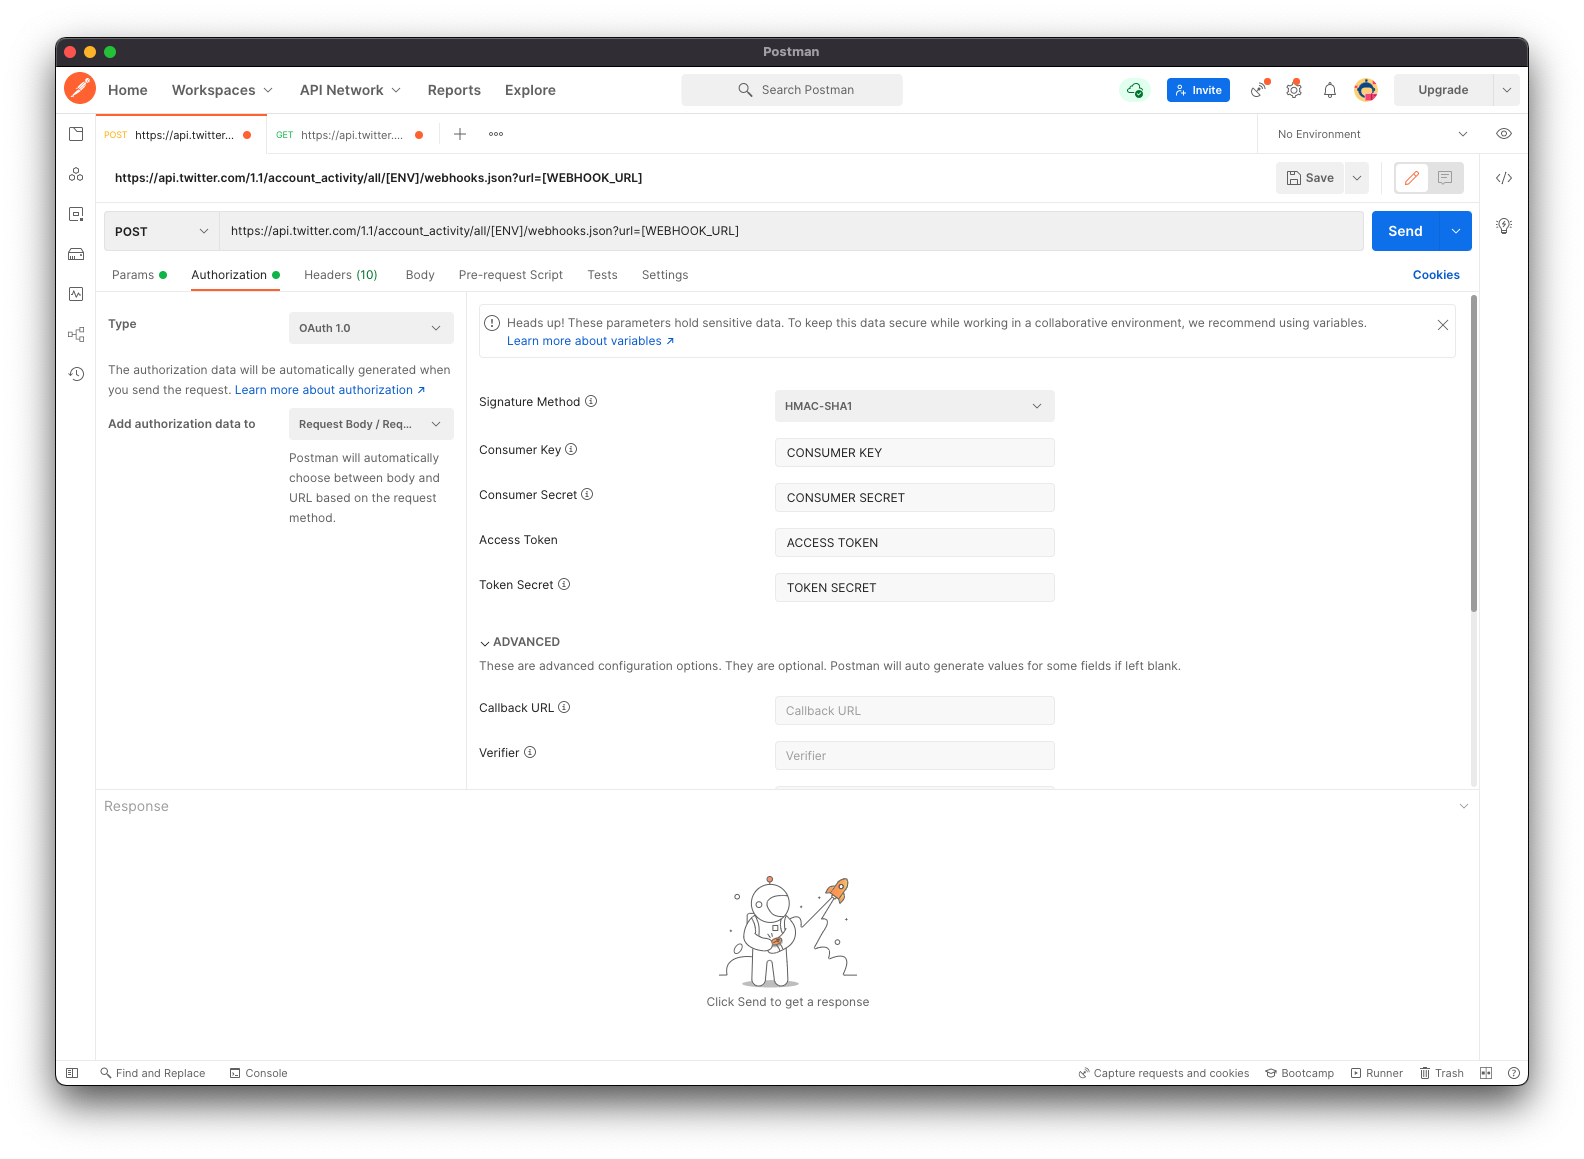 Configuring authorization in Postman